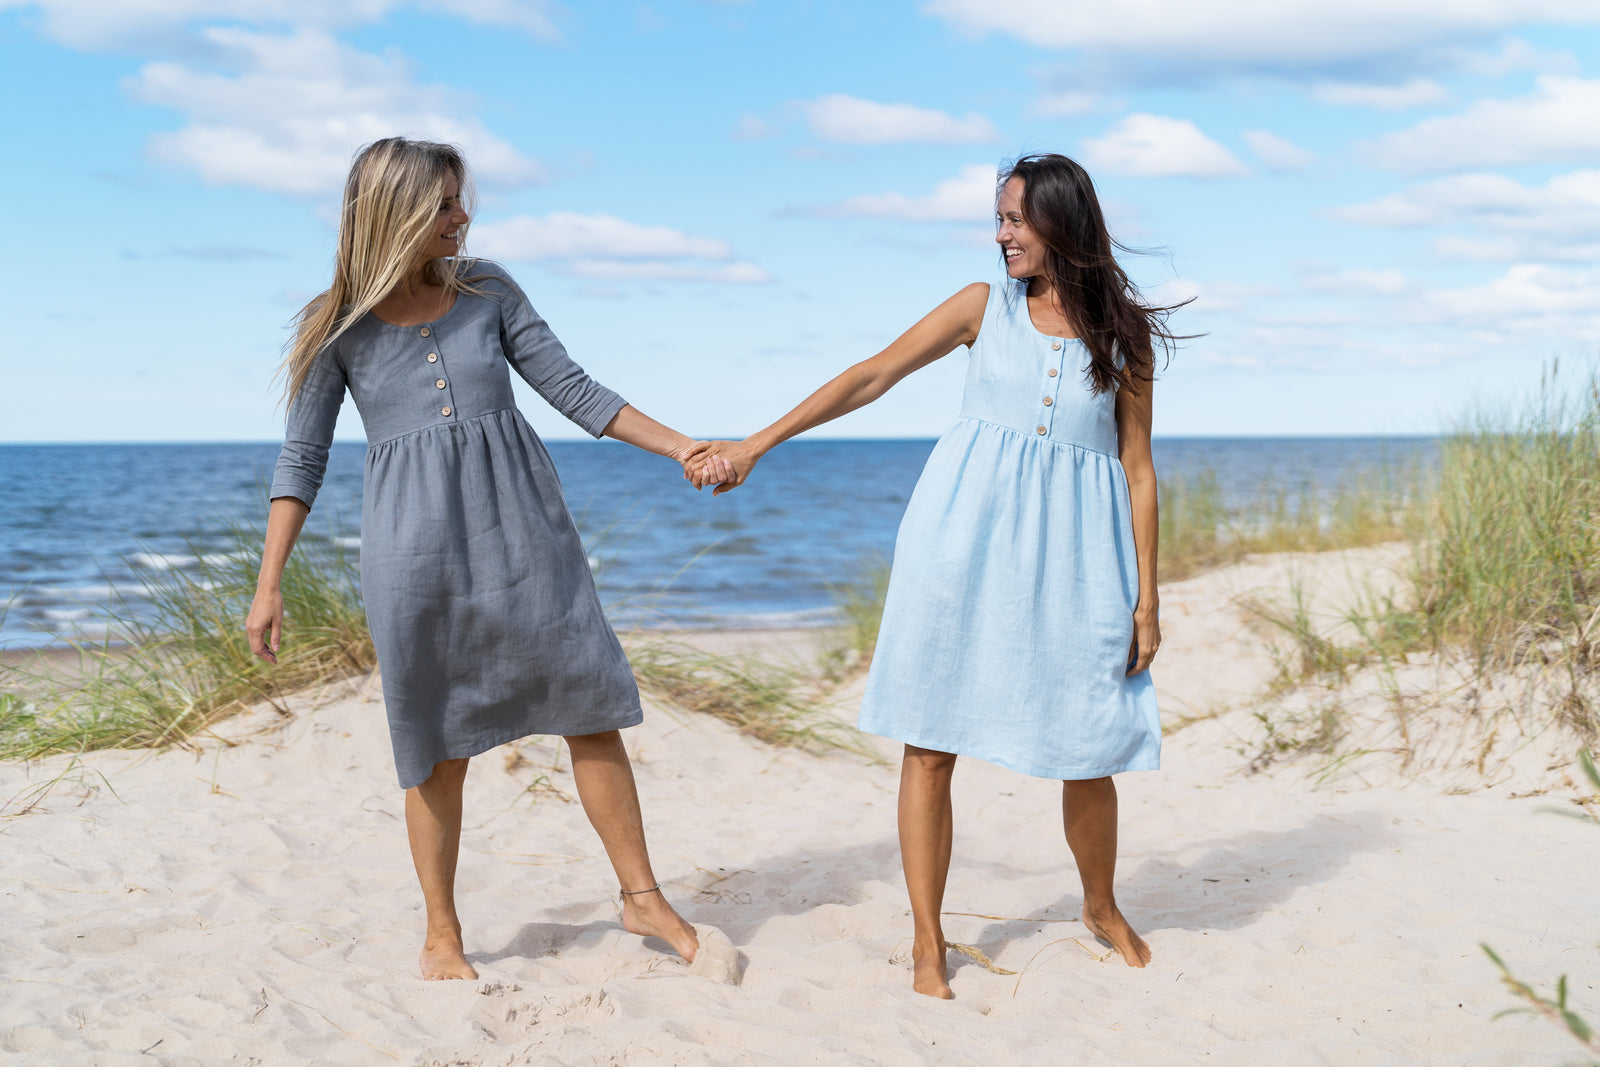 Girls dancing on the sand near sea with linen dresses